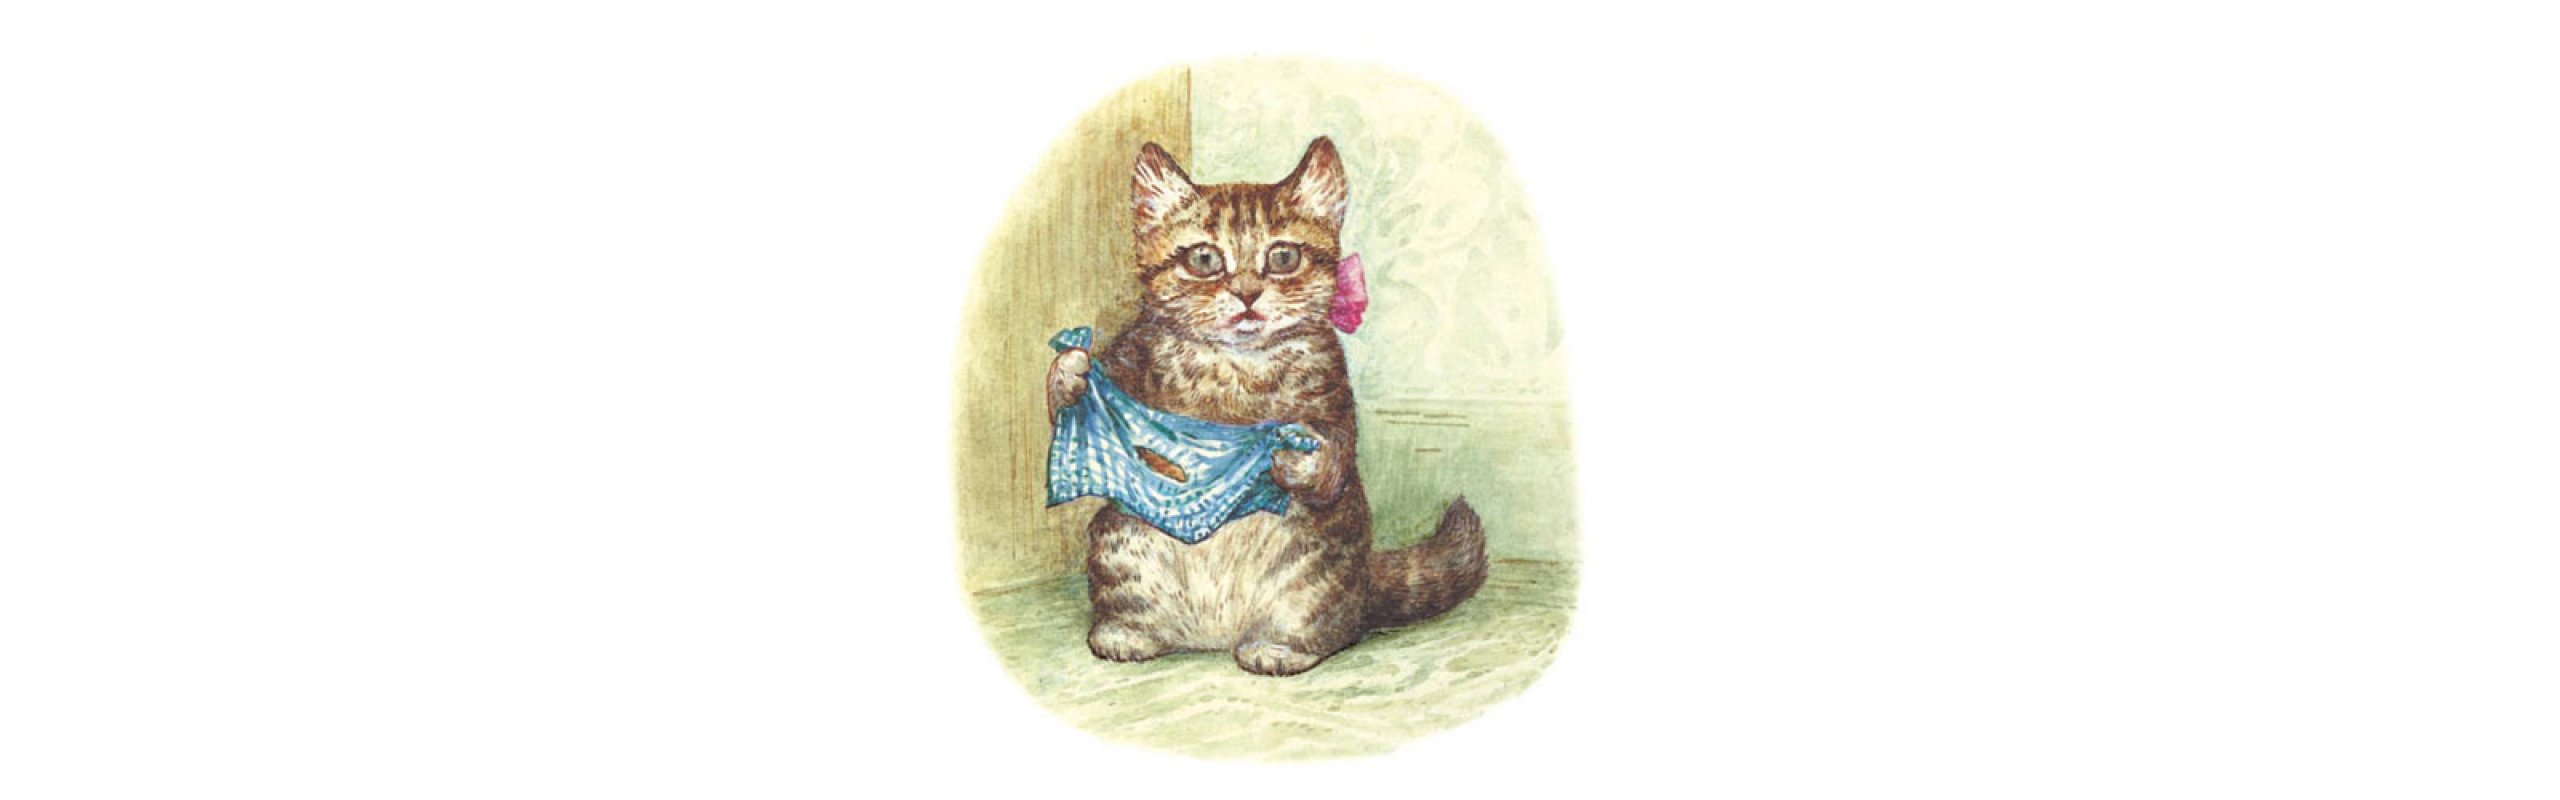 It's Storytime! The Story of Miss Moppet